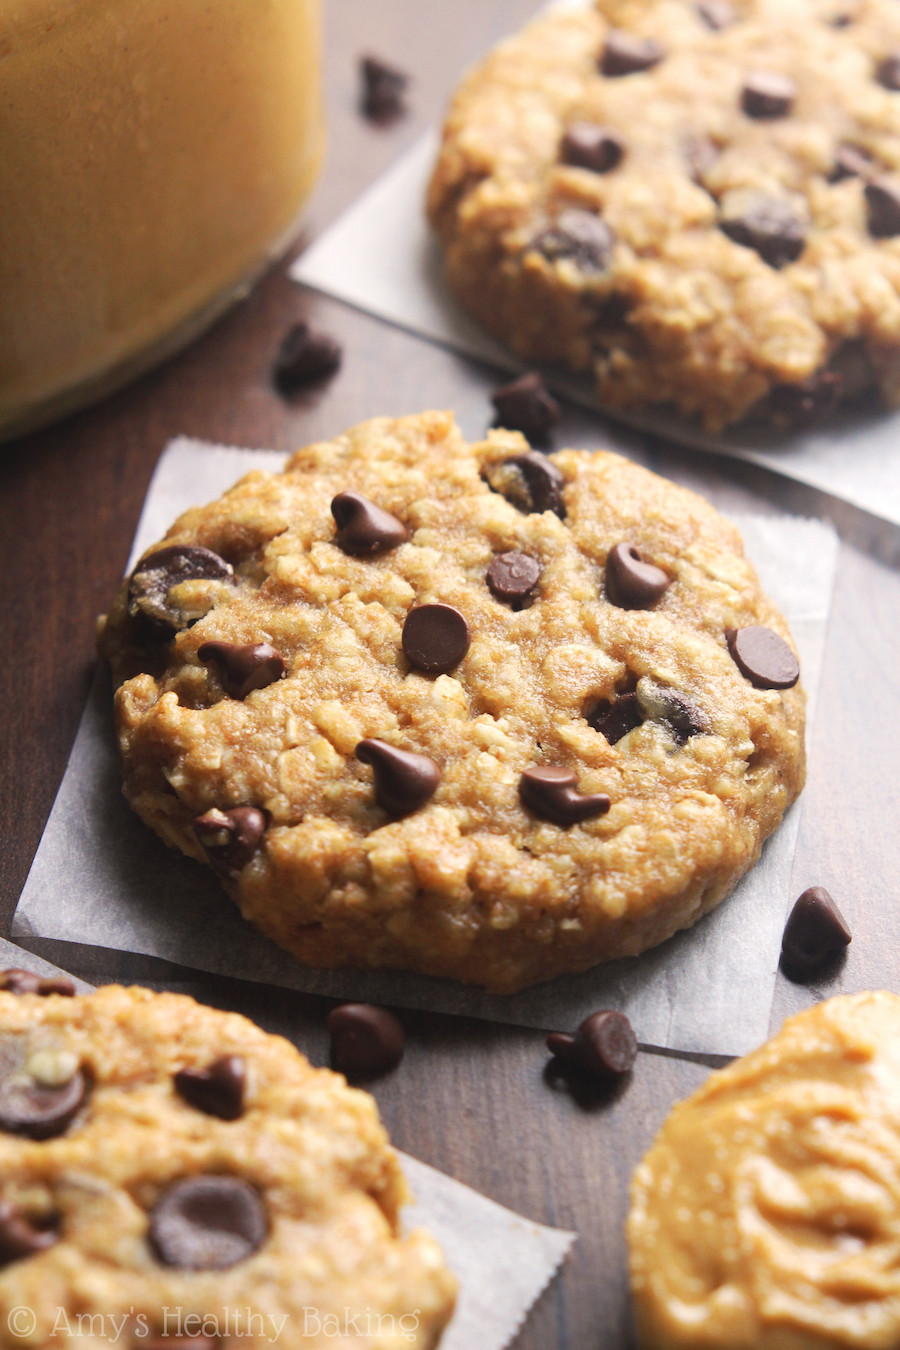 Chocolate Chip Oatmeal Cookies Healthy
 Chocolate Chip Peanut Butter Oatmeal Cookies Recipe Video